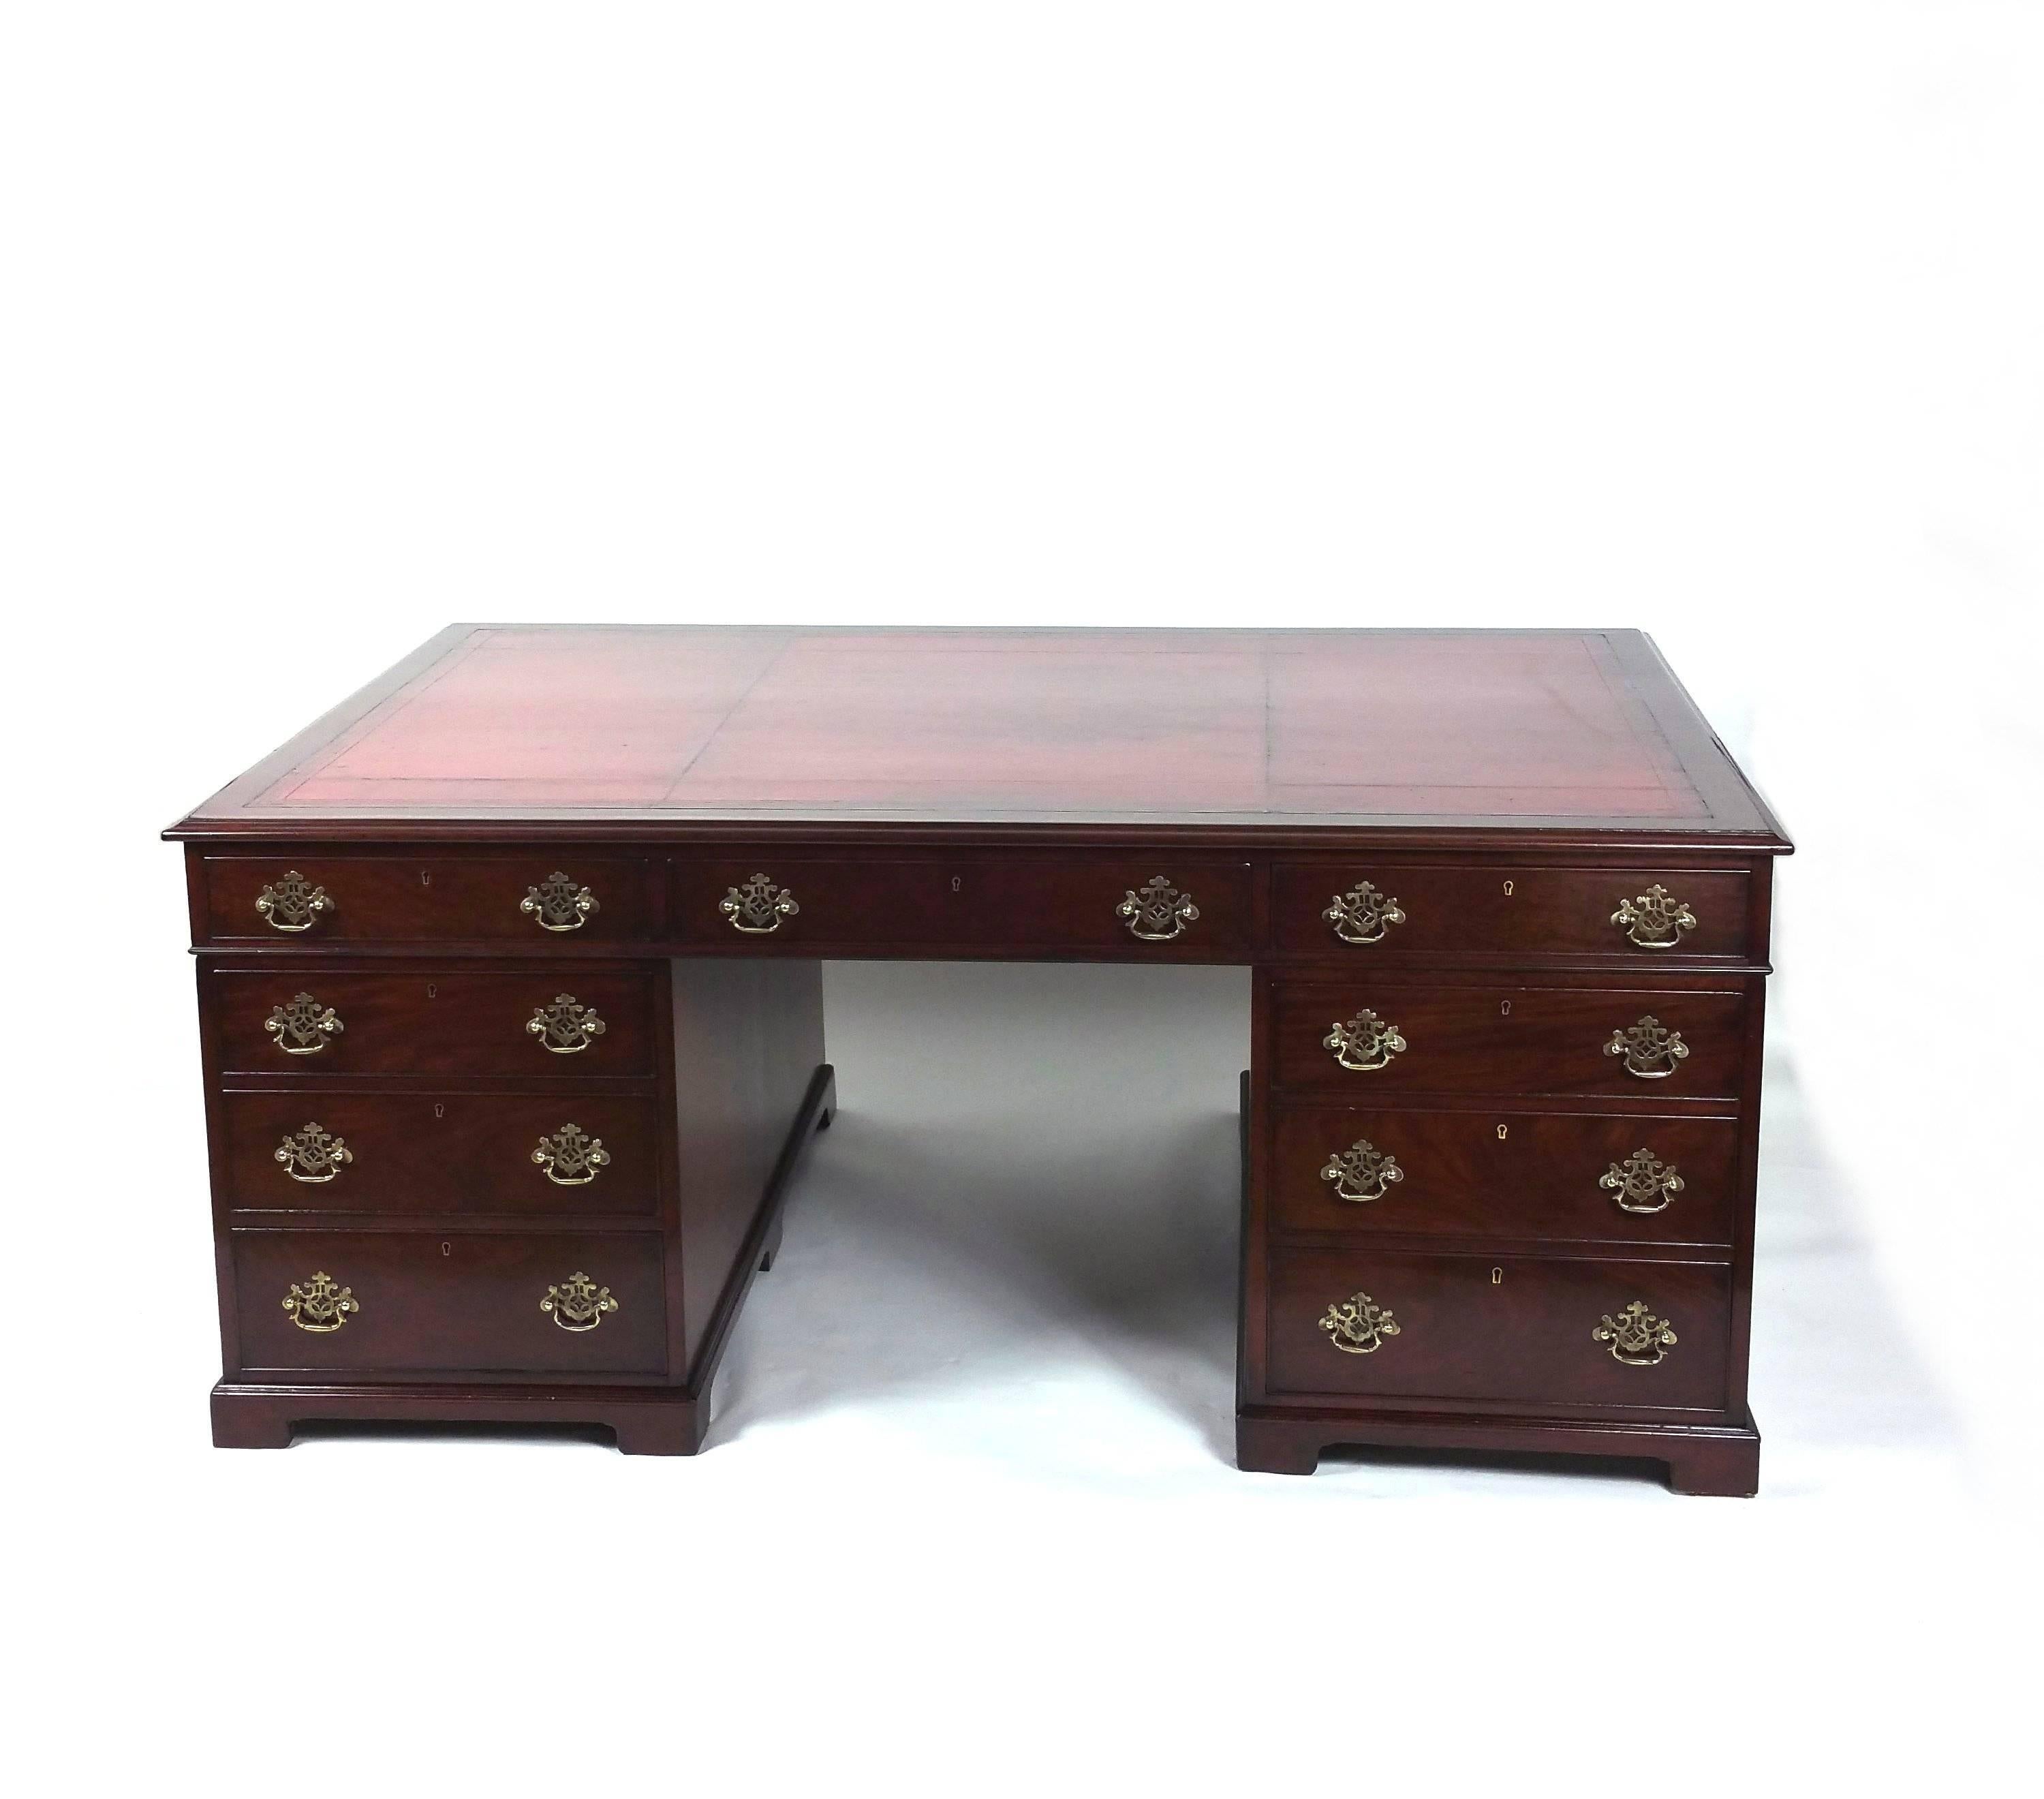 This magnificent and impressively large Victorian partners desk is stamped Phillips of Bristol, a fine cabinet maker of the period, and features the original tooled red leather top. The desk has nine drawers on the one side and three drawers over